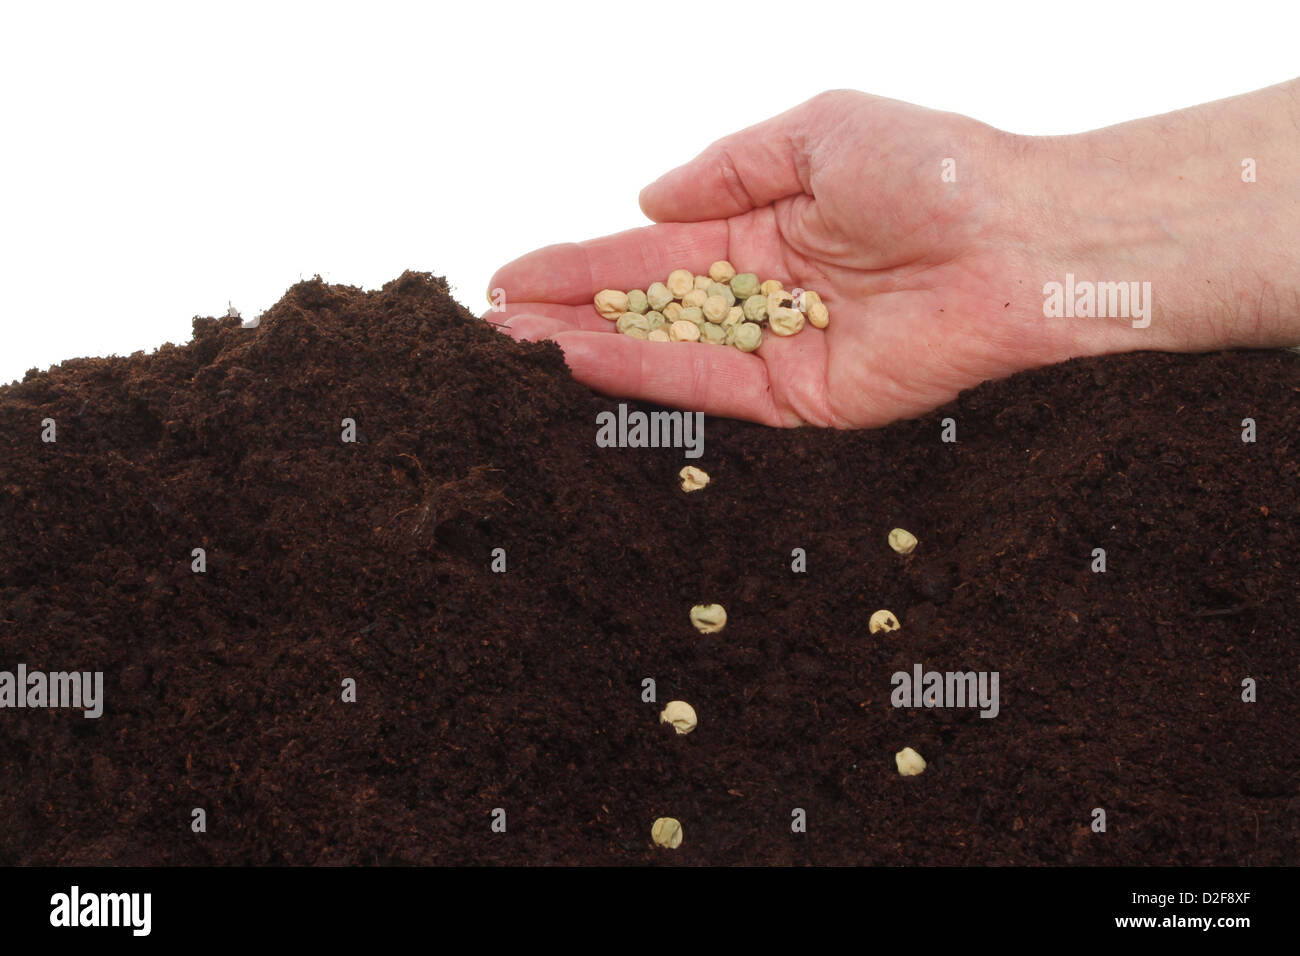 Hand sowing pea seeds into a furrow in soil Stock Photo